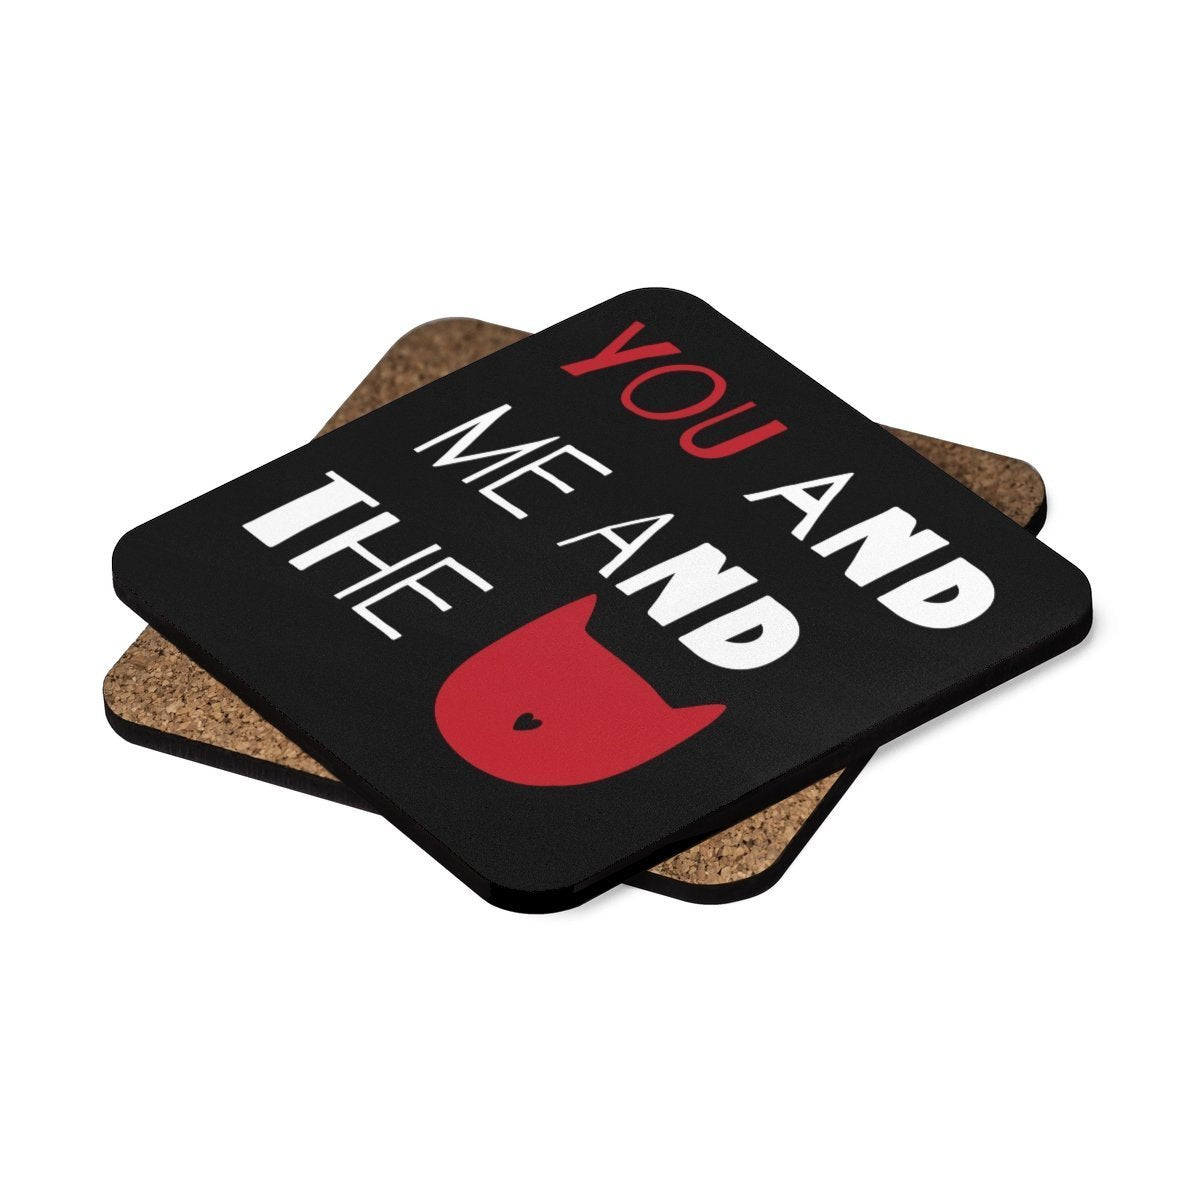 Gifts for Cat Lovers, You and Me and the Cat Coasters Set - 4pcs